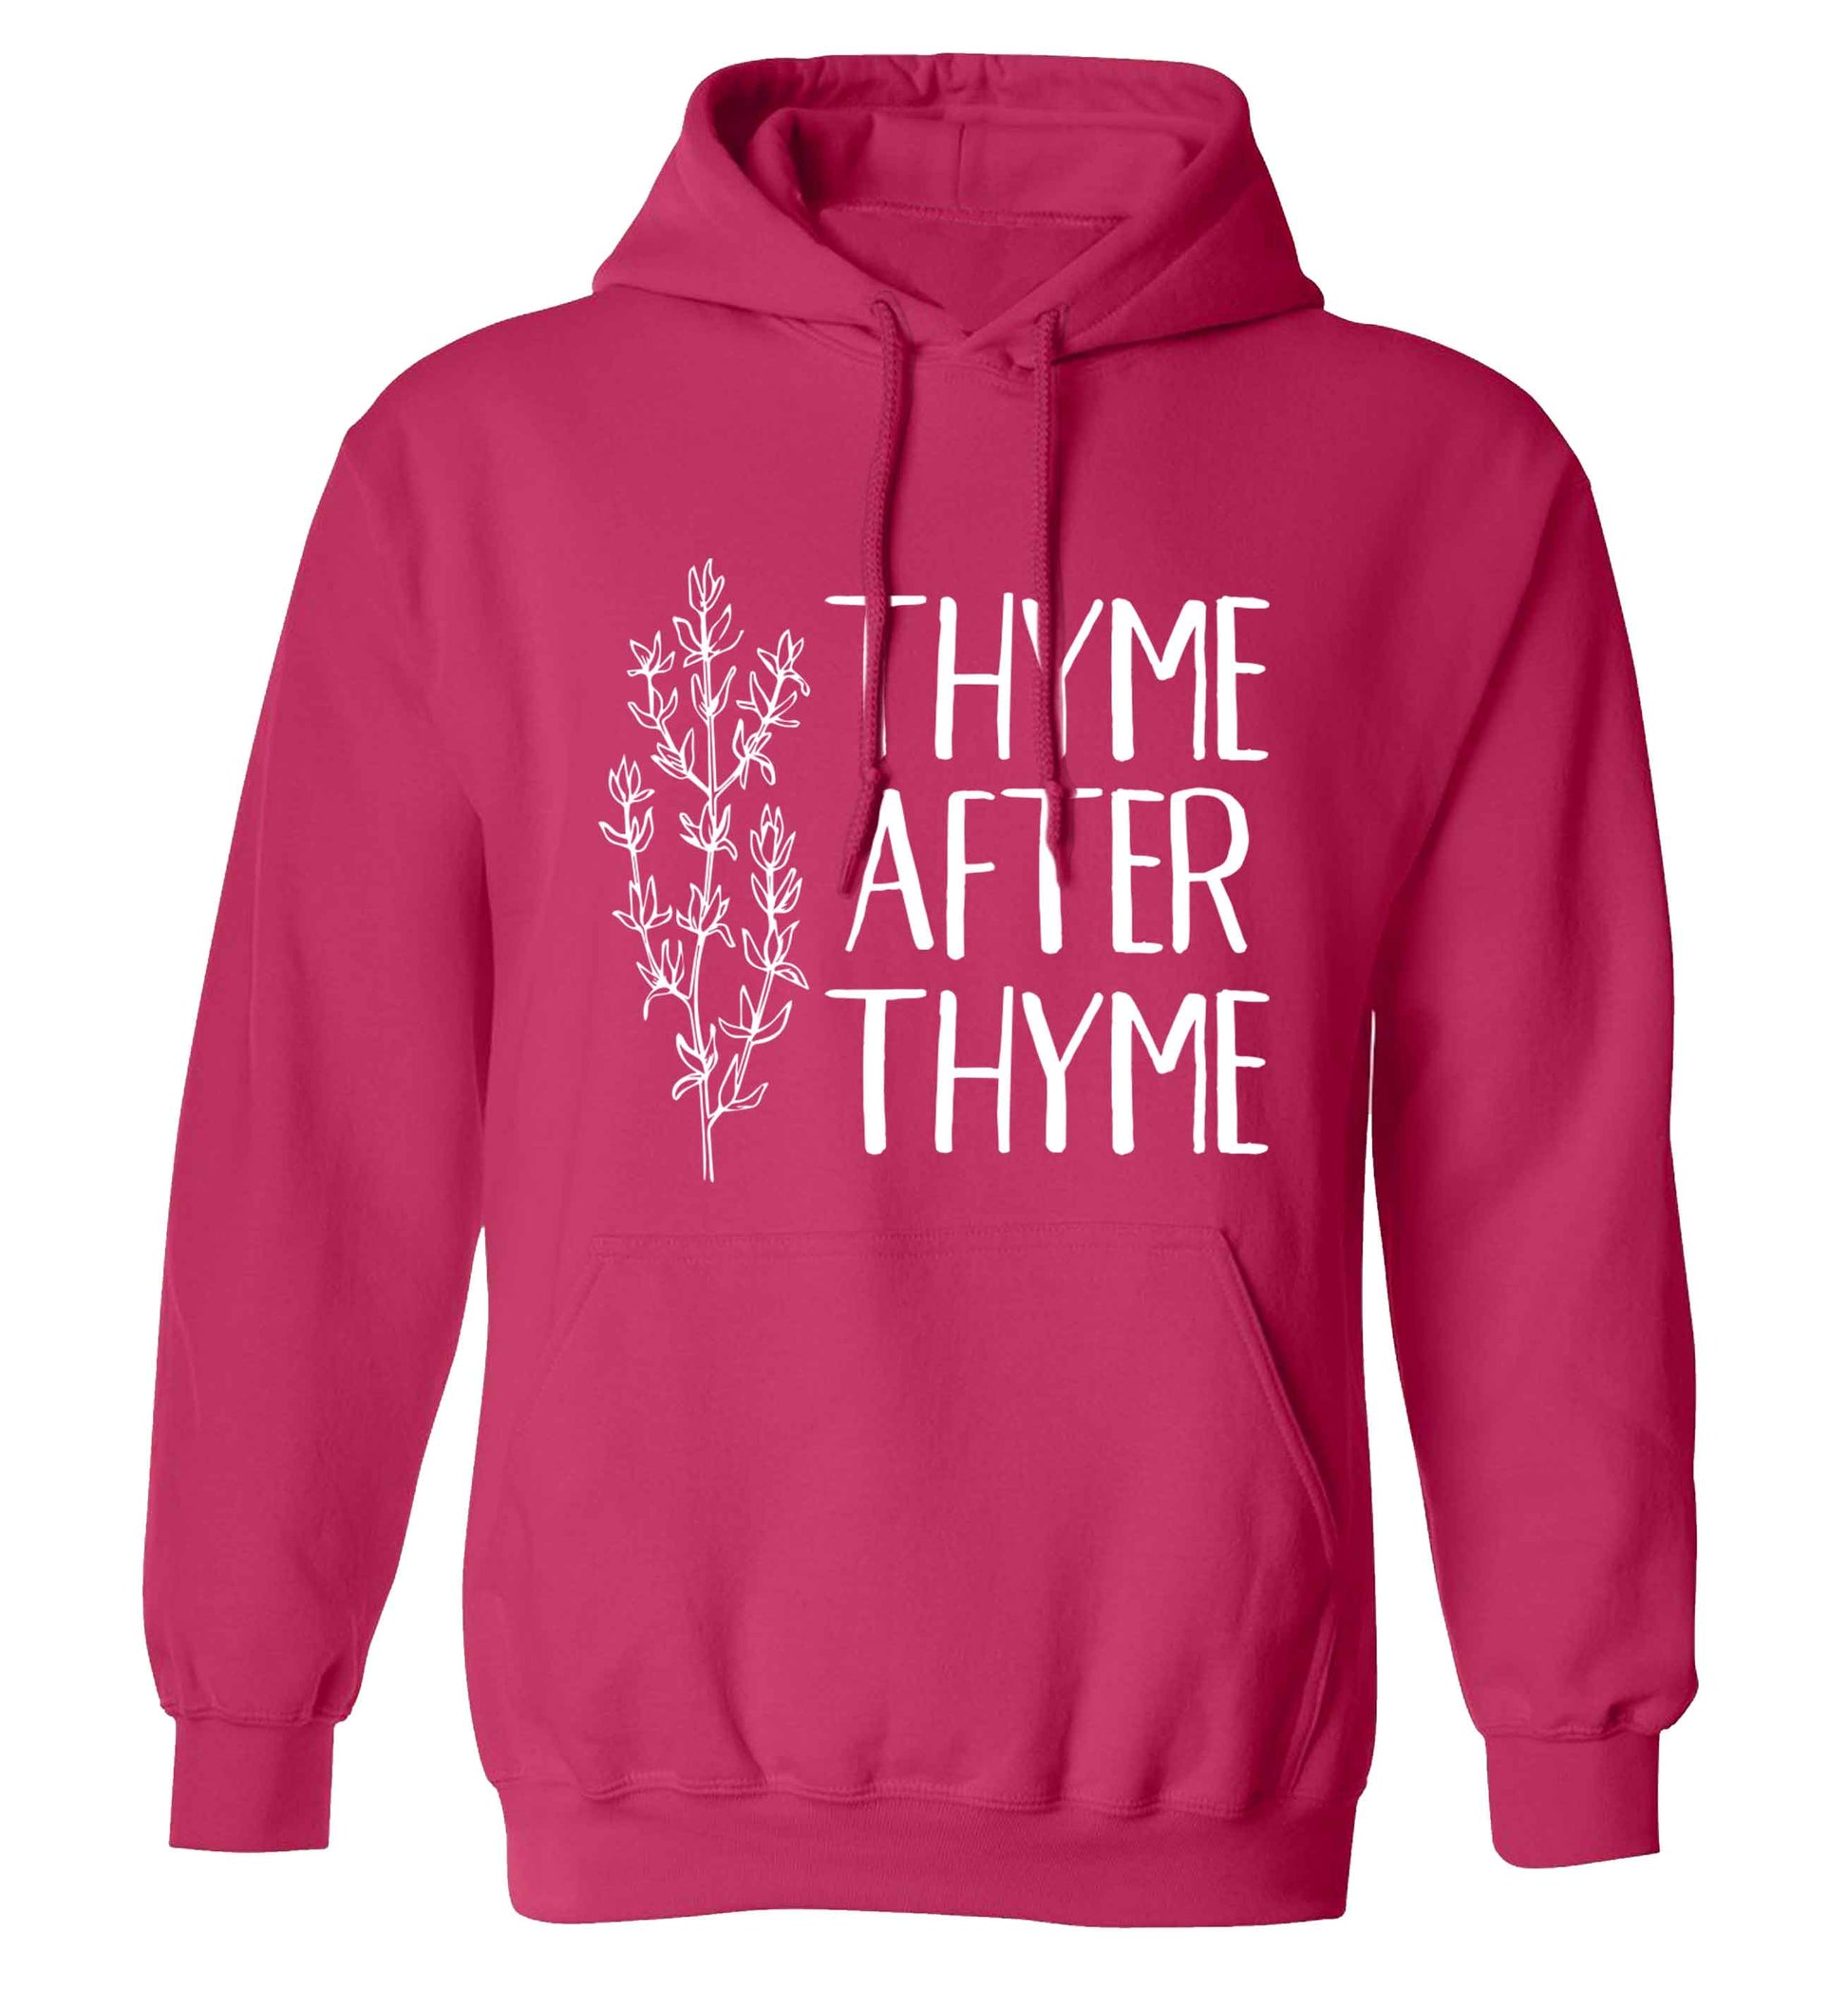 Thyme after thyme adults unisex pink hoodie 2XL